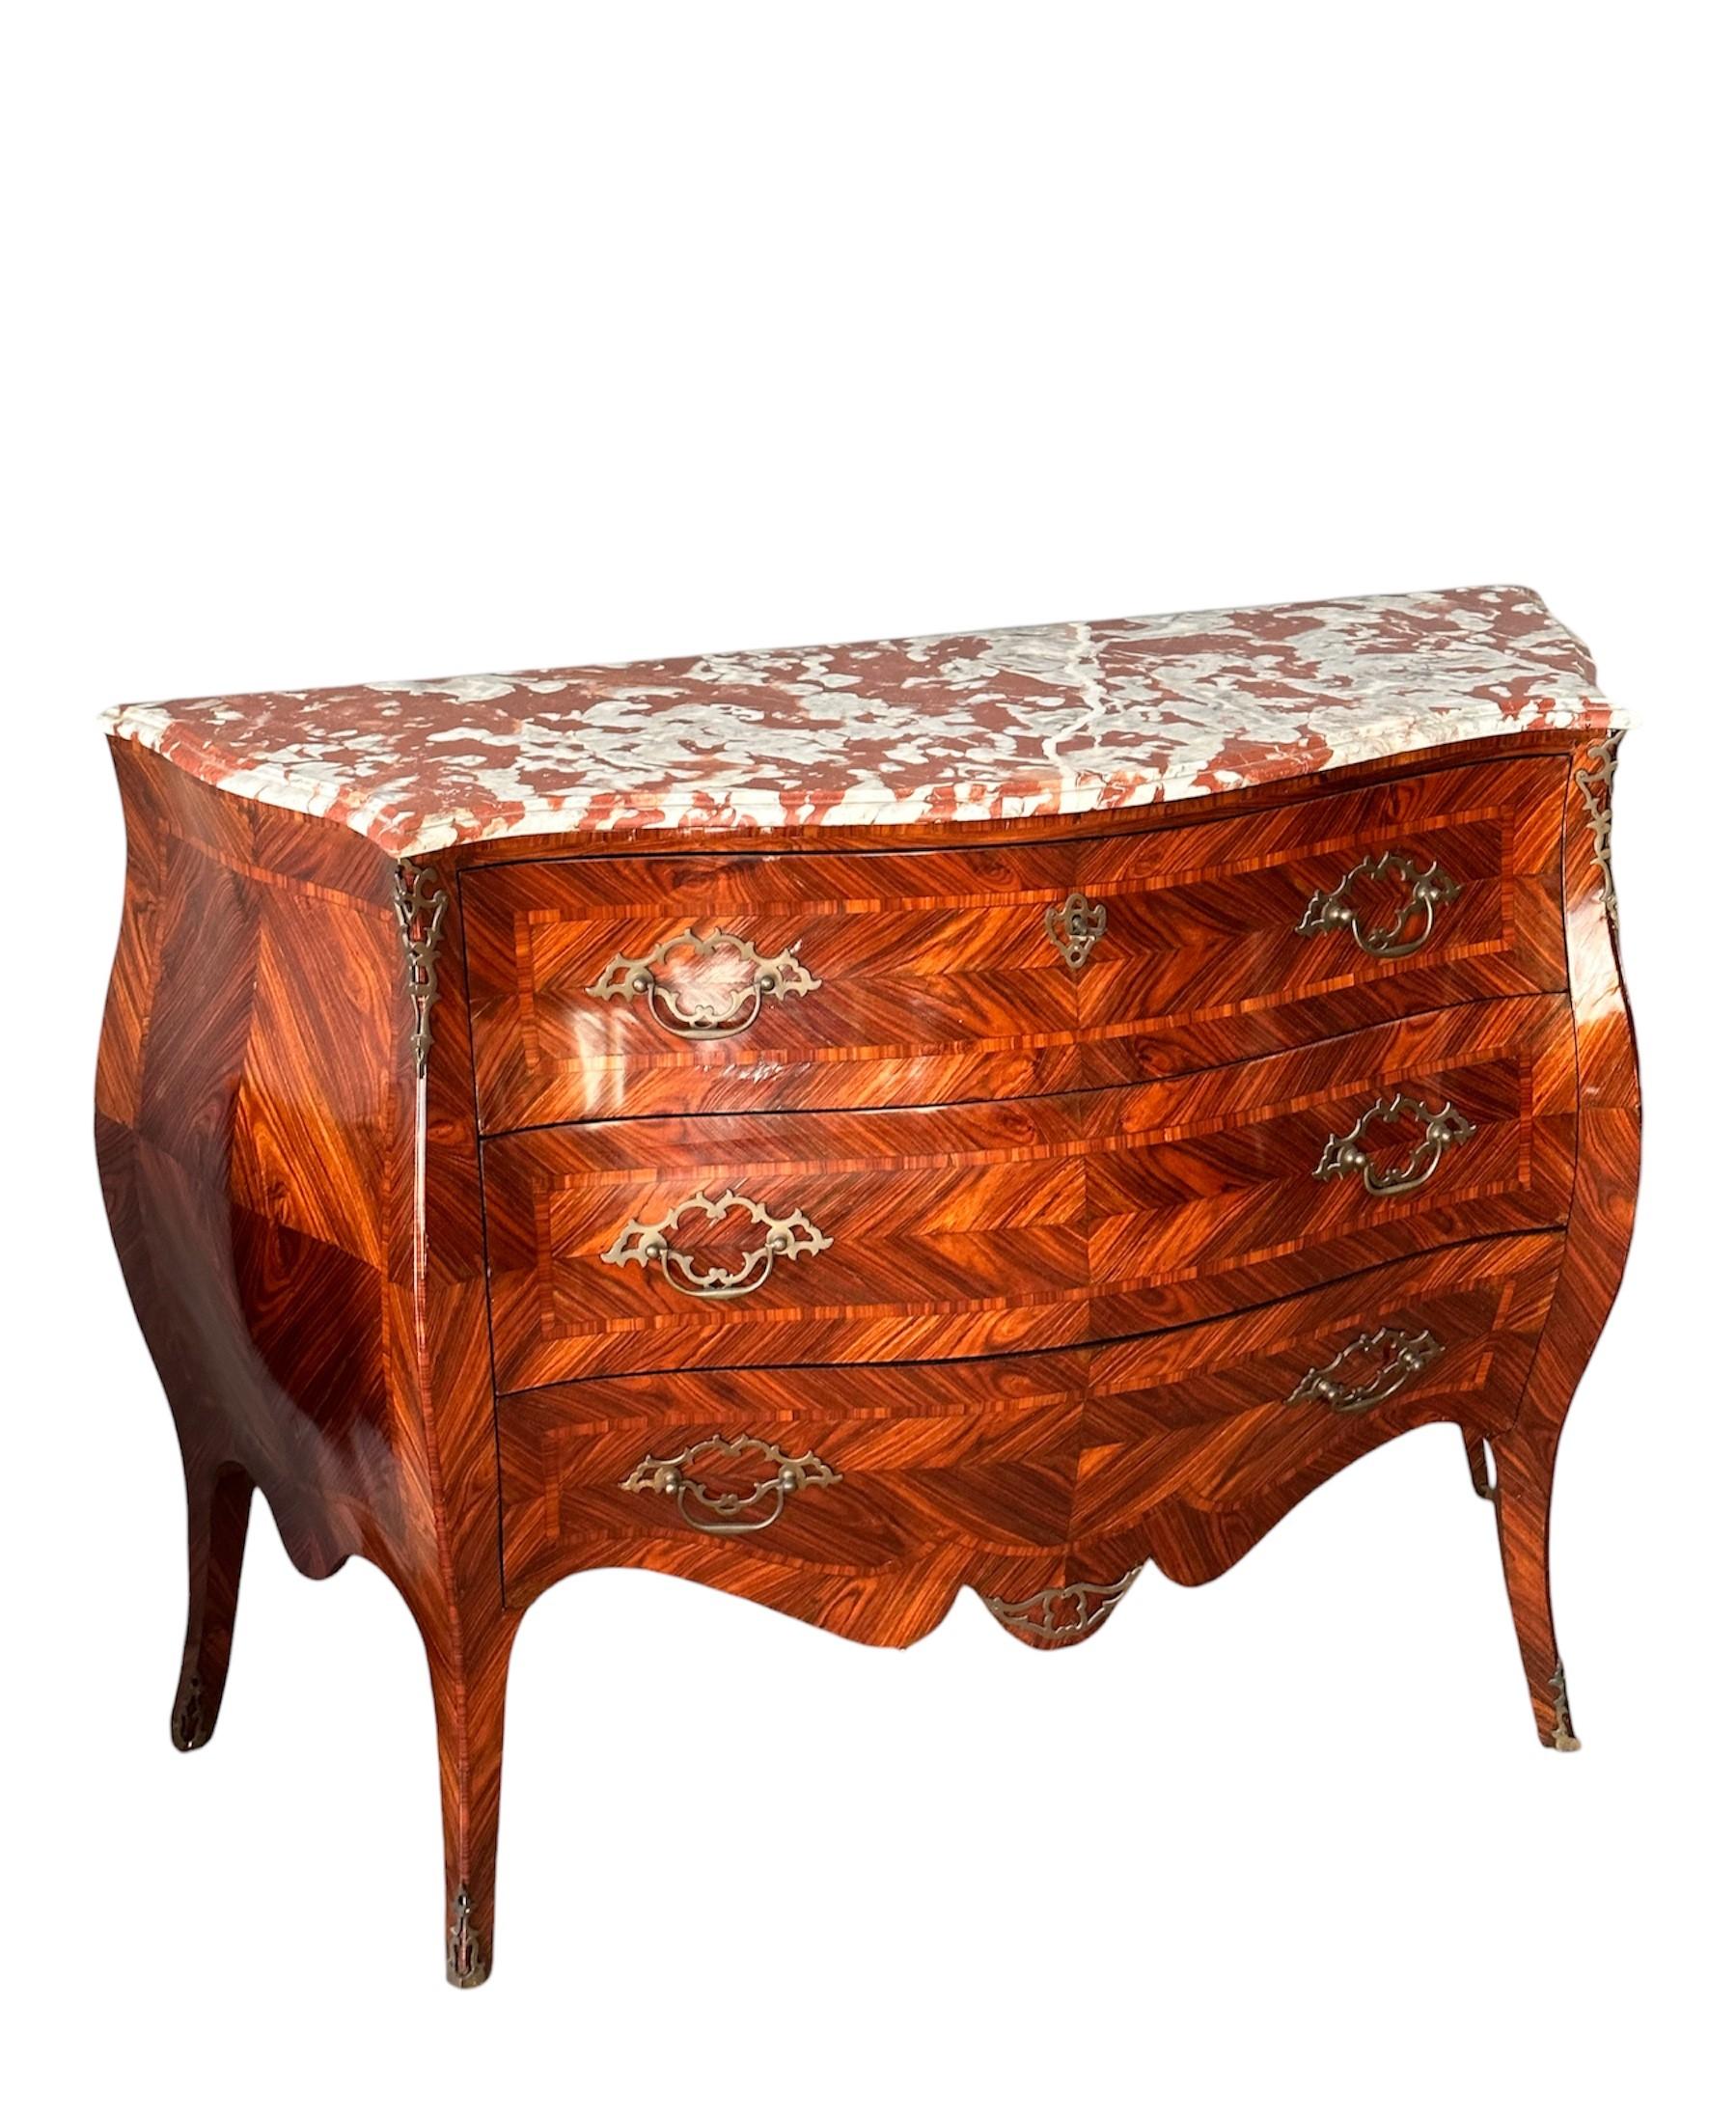 19th century, Napoleon III, Dresser and two nightstands in ebony and marble For Sale 1